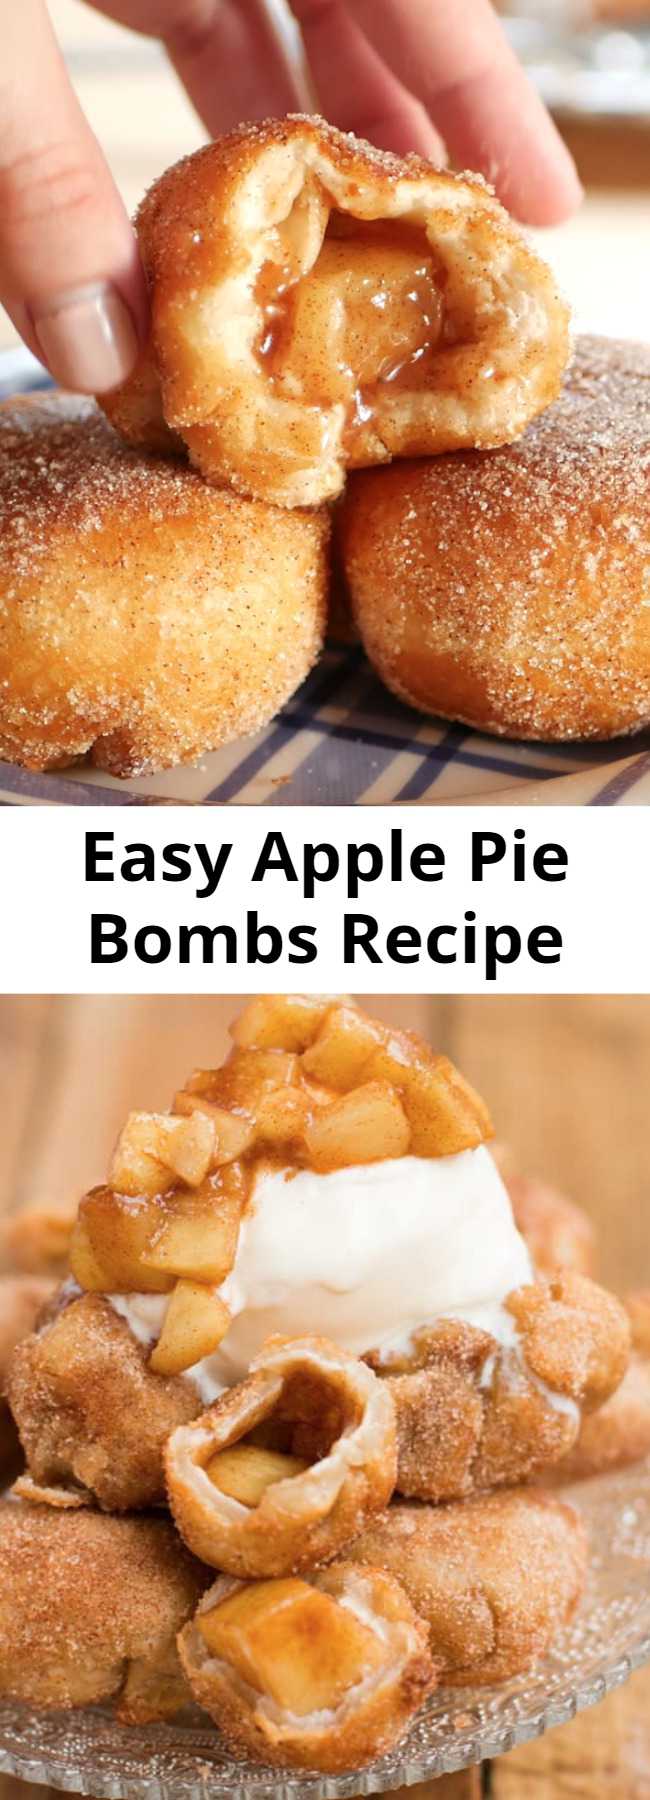 Easy Apple Pie Bombs Recipe - It's not fall until you've made apple pie bombs a la mode with creamy vanilla ice cream and those glazed apples all over the tops. I love fall dessert recipes!